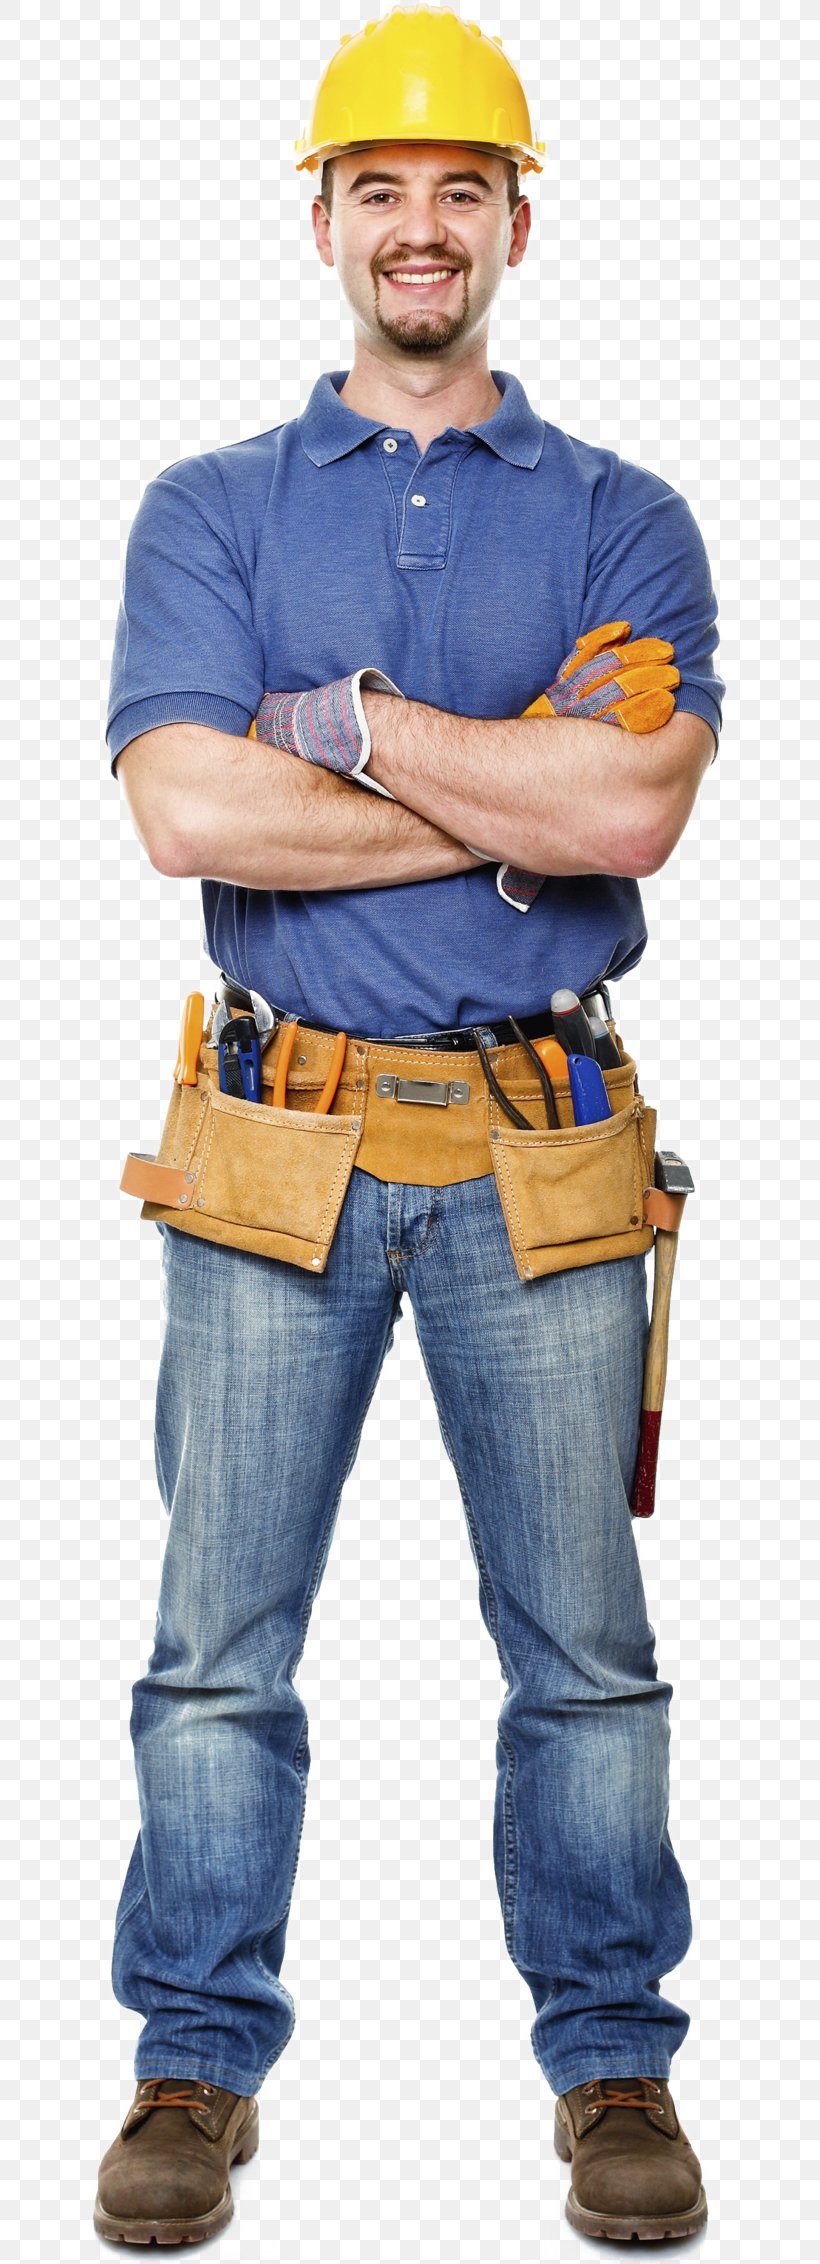 Stock Photography Handyman Plumbing Image IStock, PNG, 640x2264px, Stock Photography, Architectural Engineering, Blue Collar Worker, Carpenter, Climbing Harness Download Free